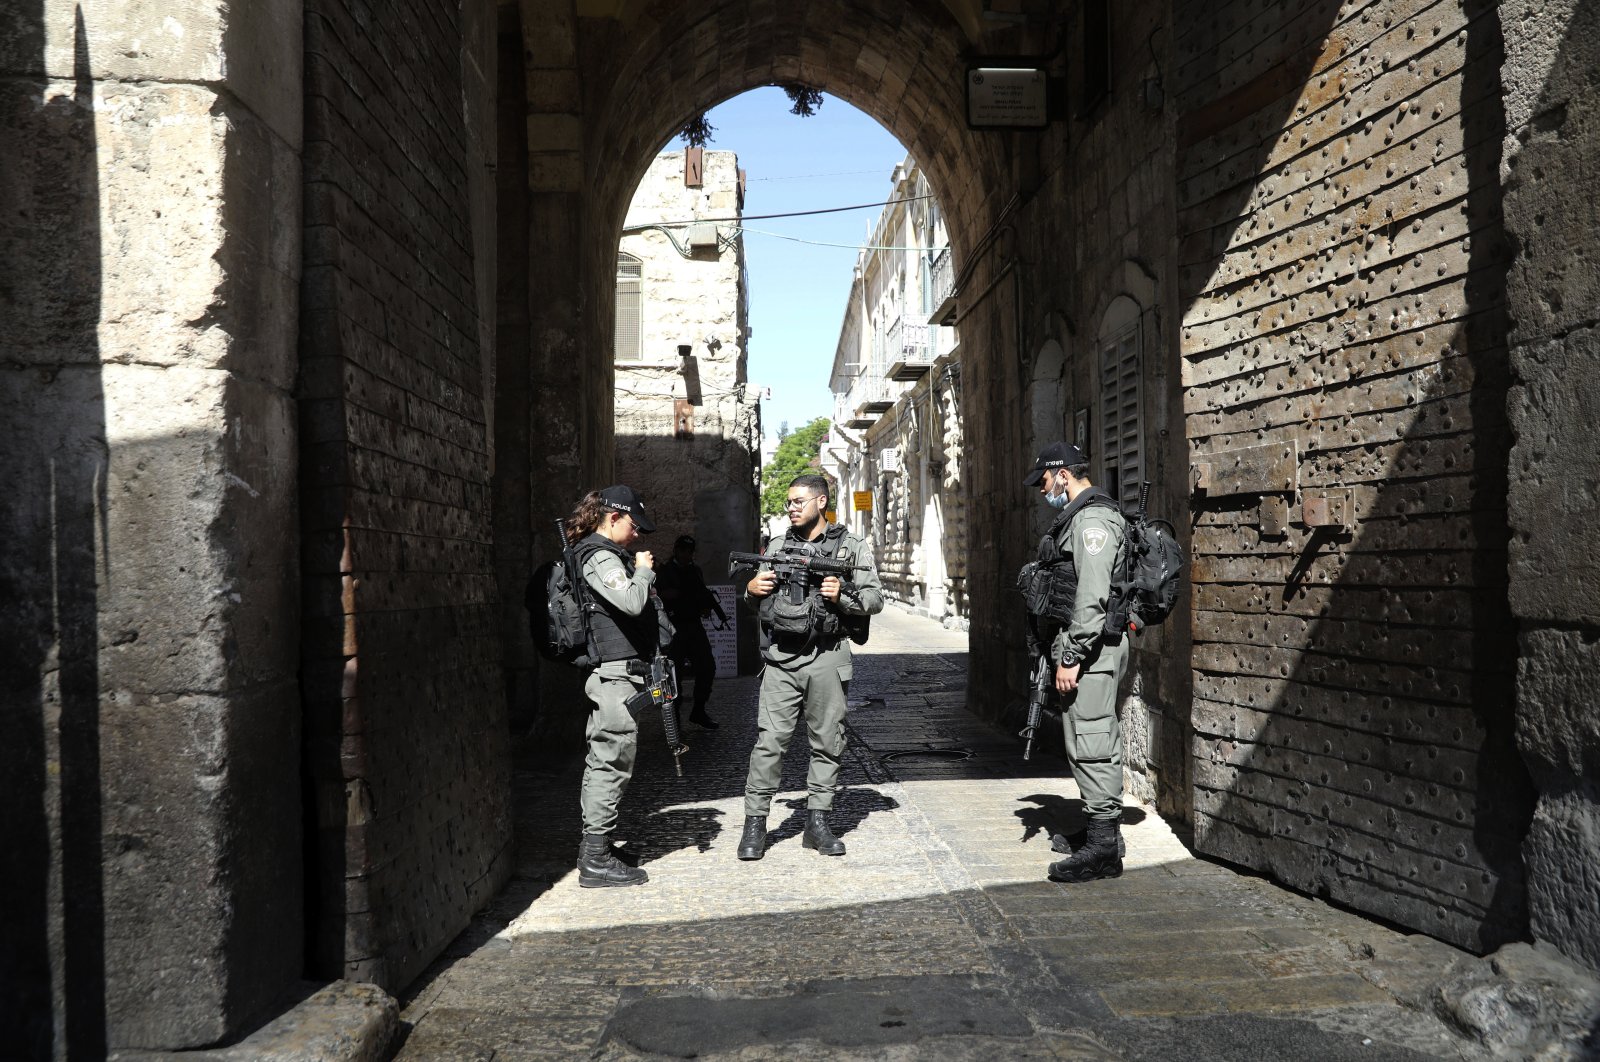 Israeli police officers secure the area of Lion's gate in Jerusalem's Old City, May 30, 2020. (AP Photo)